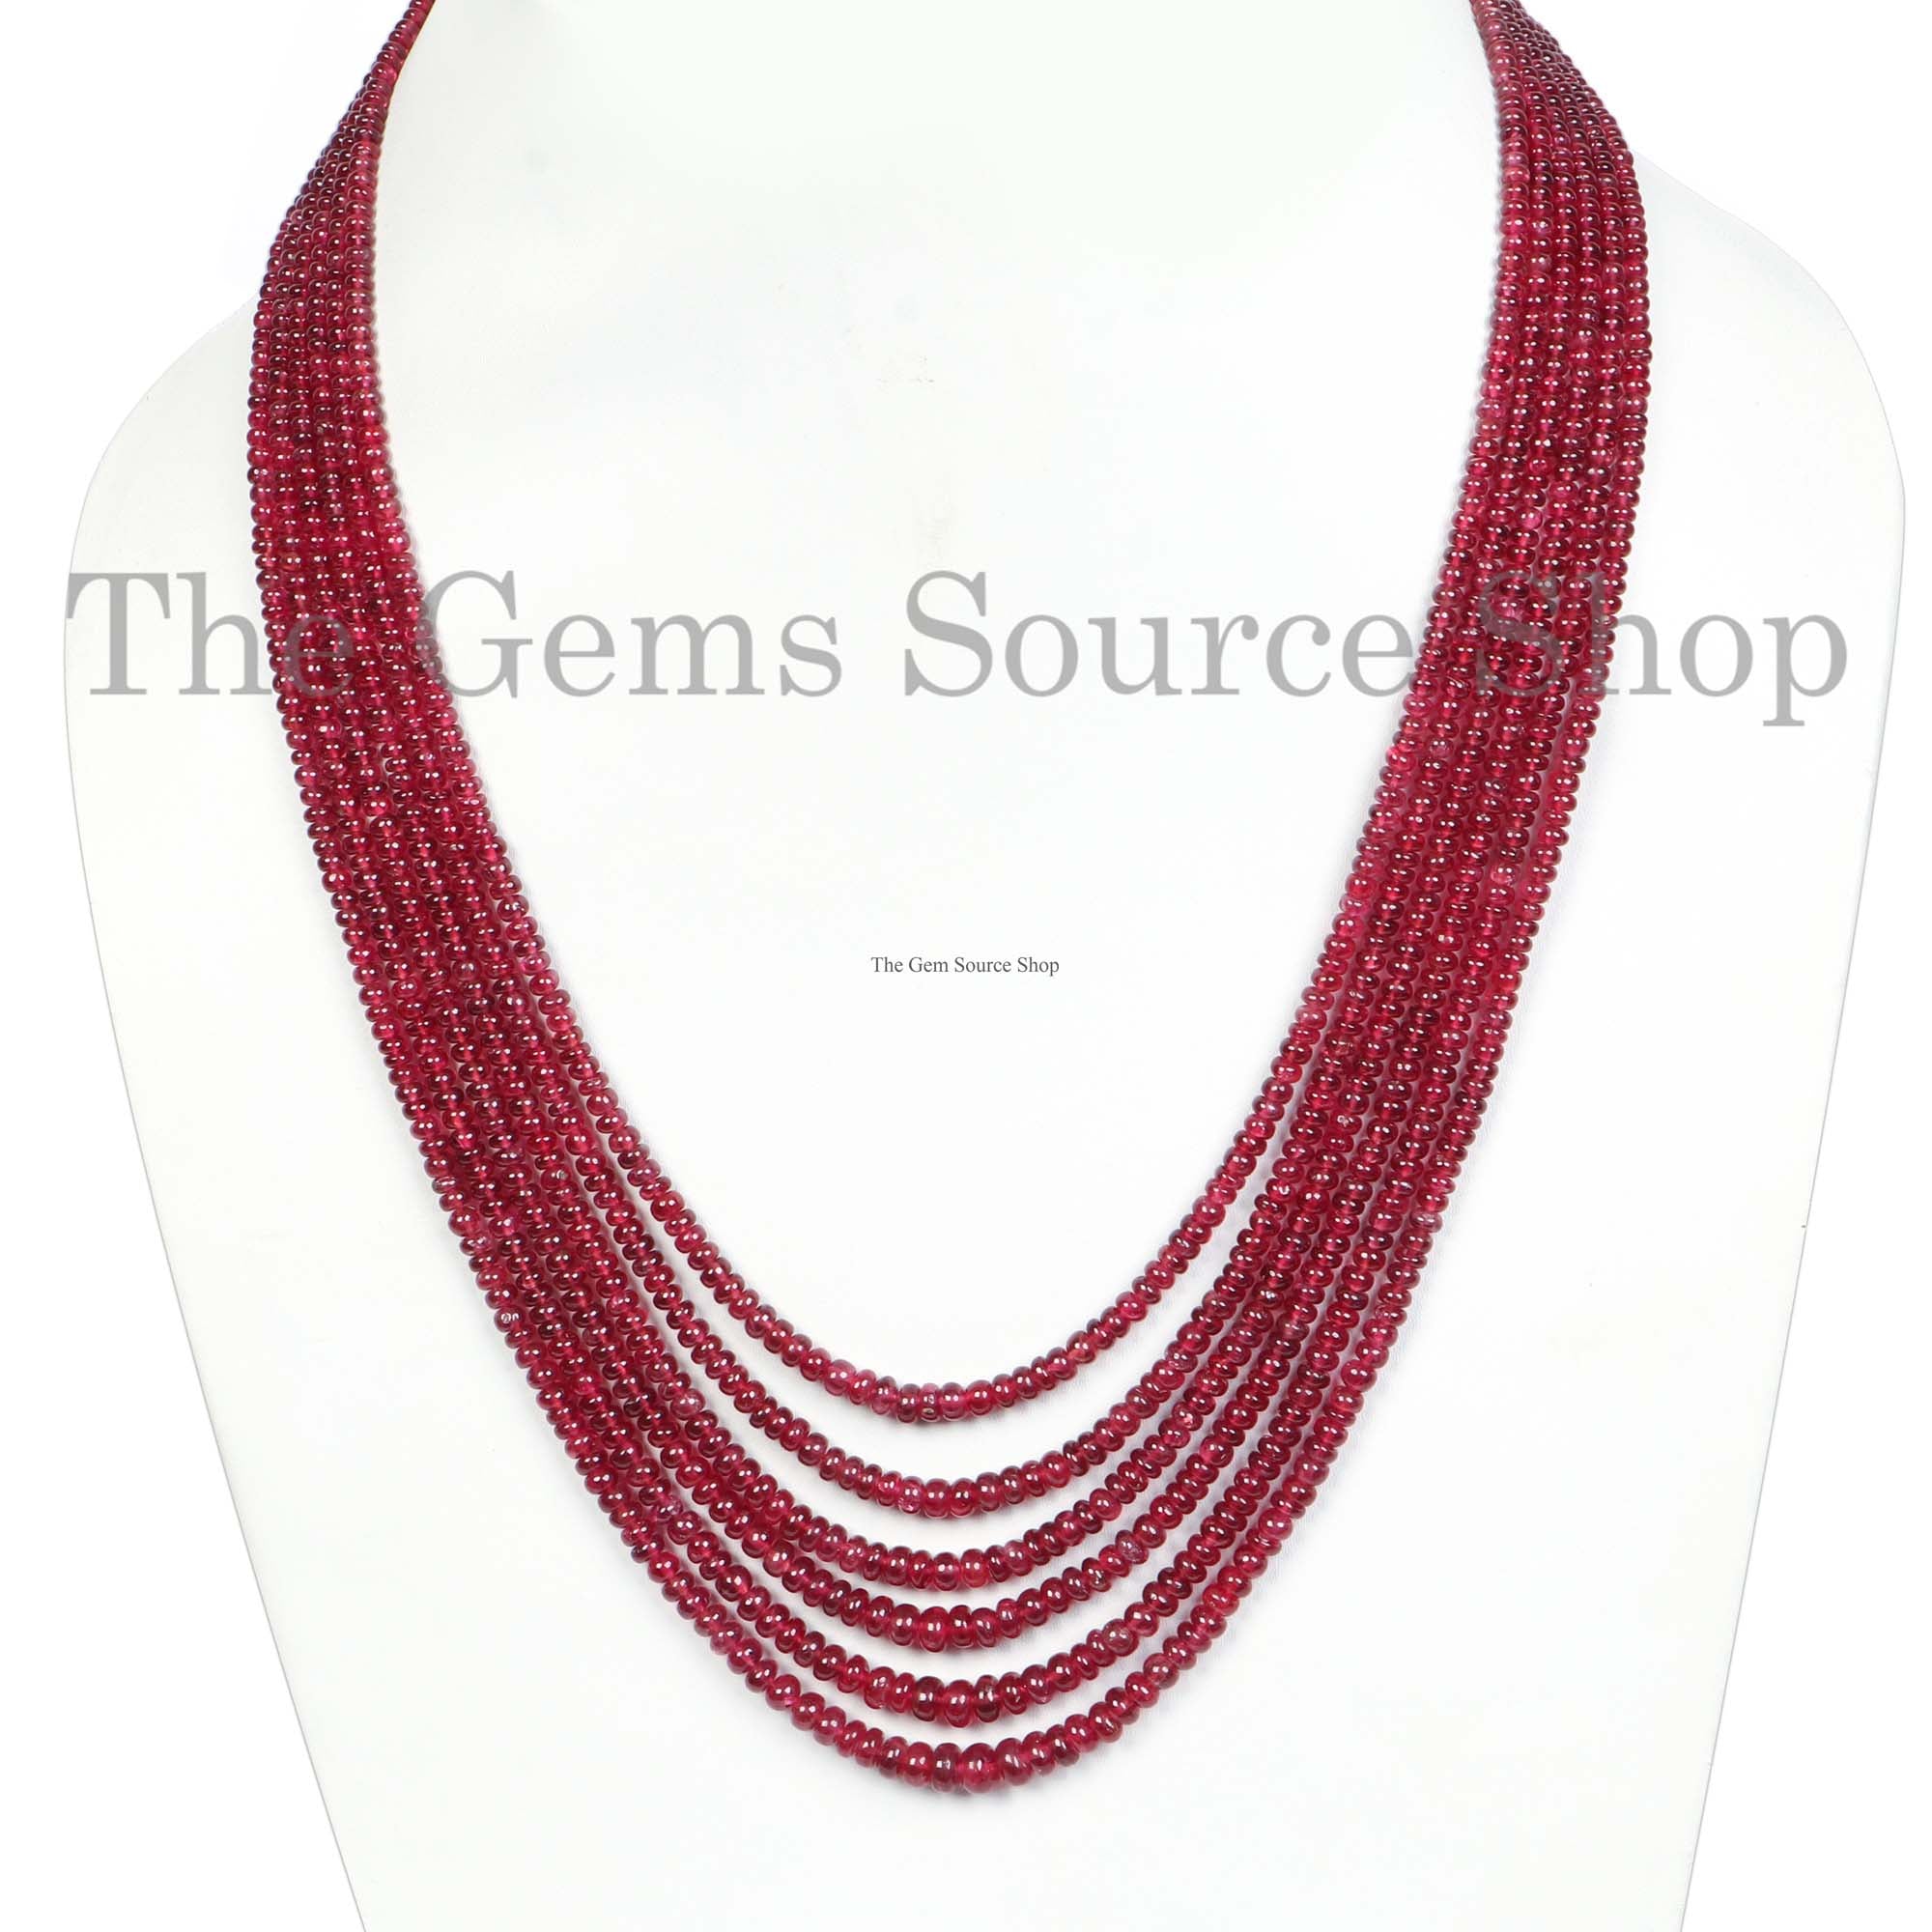 Top Quality Red Spinel Necklace, Smooth Rondelle Beads Necklace, 6 Line Necklace Set, Gemstone Jewelry